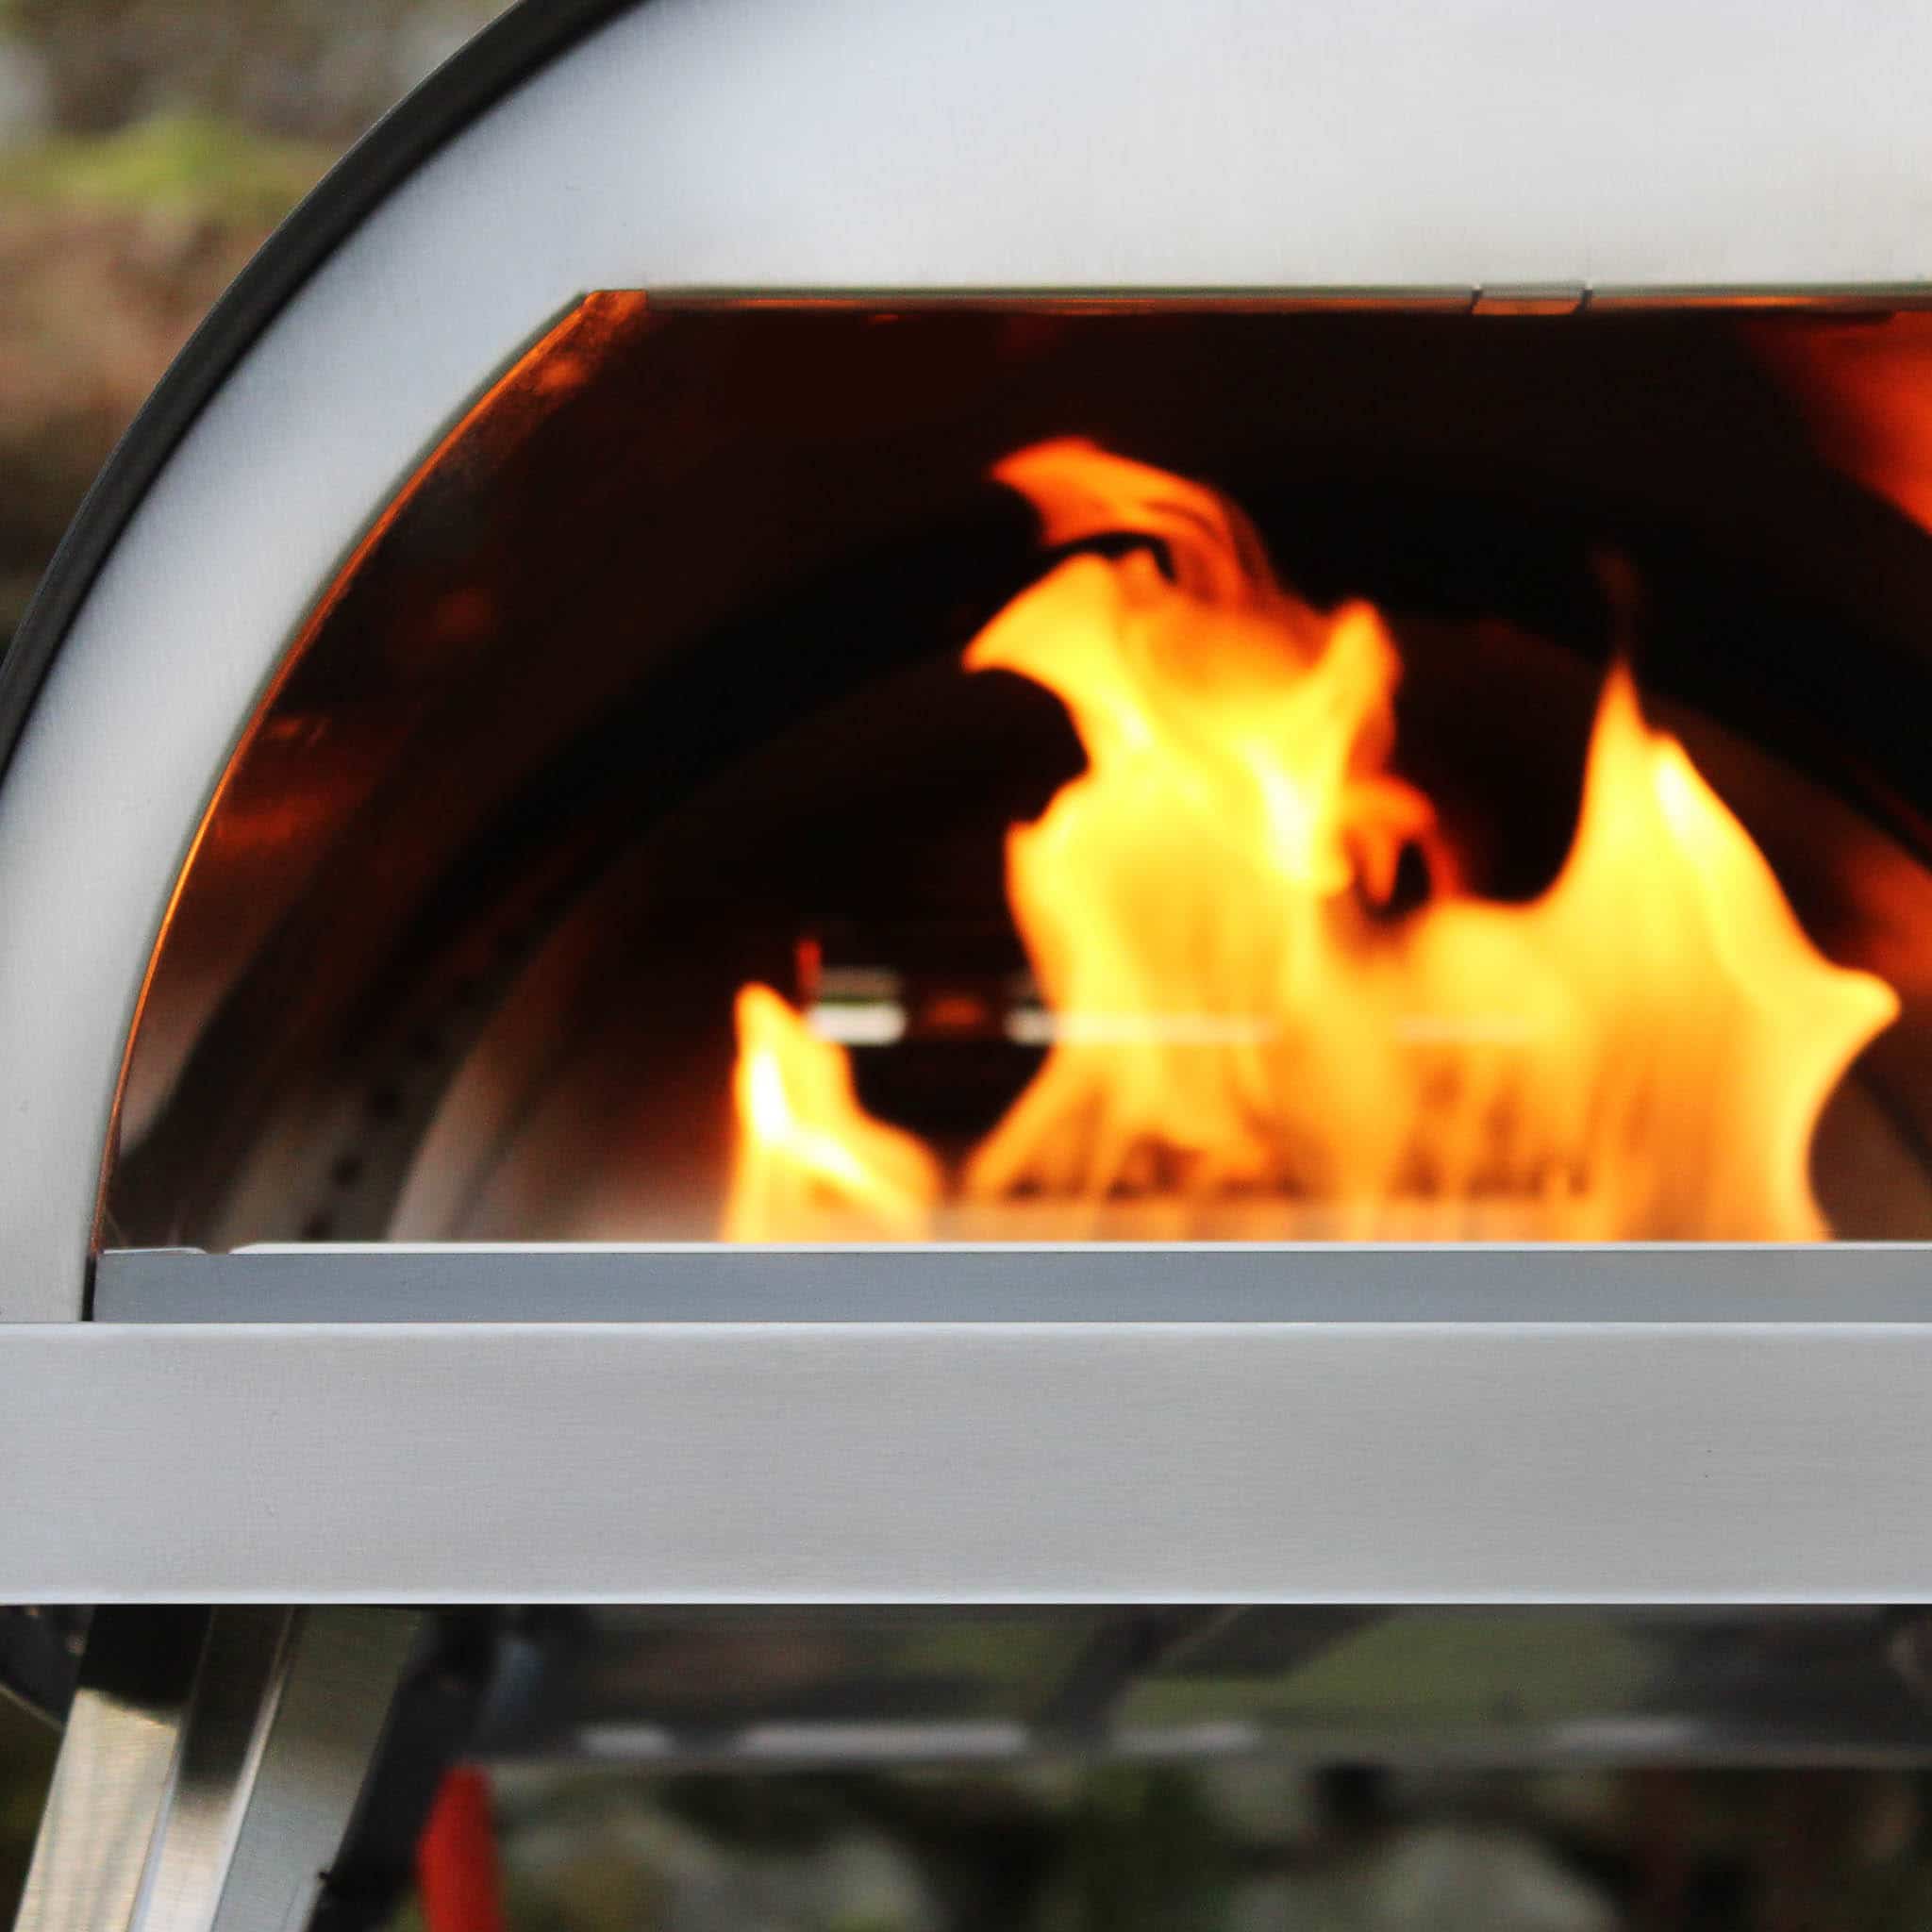 Woody Multi-Fuel Pizza Oven